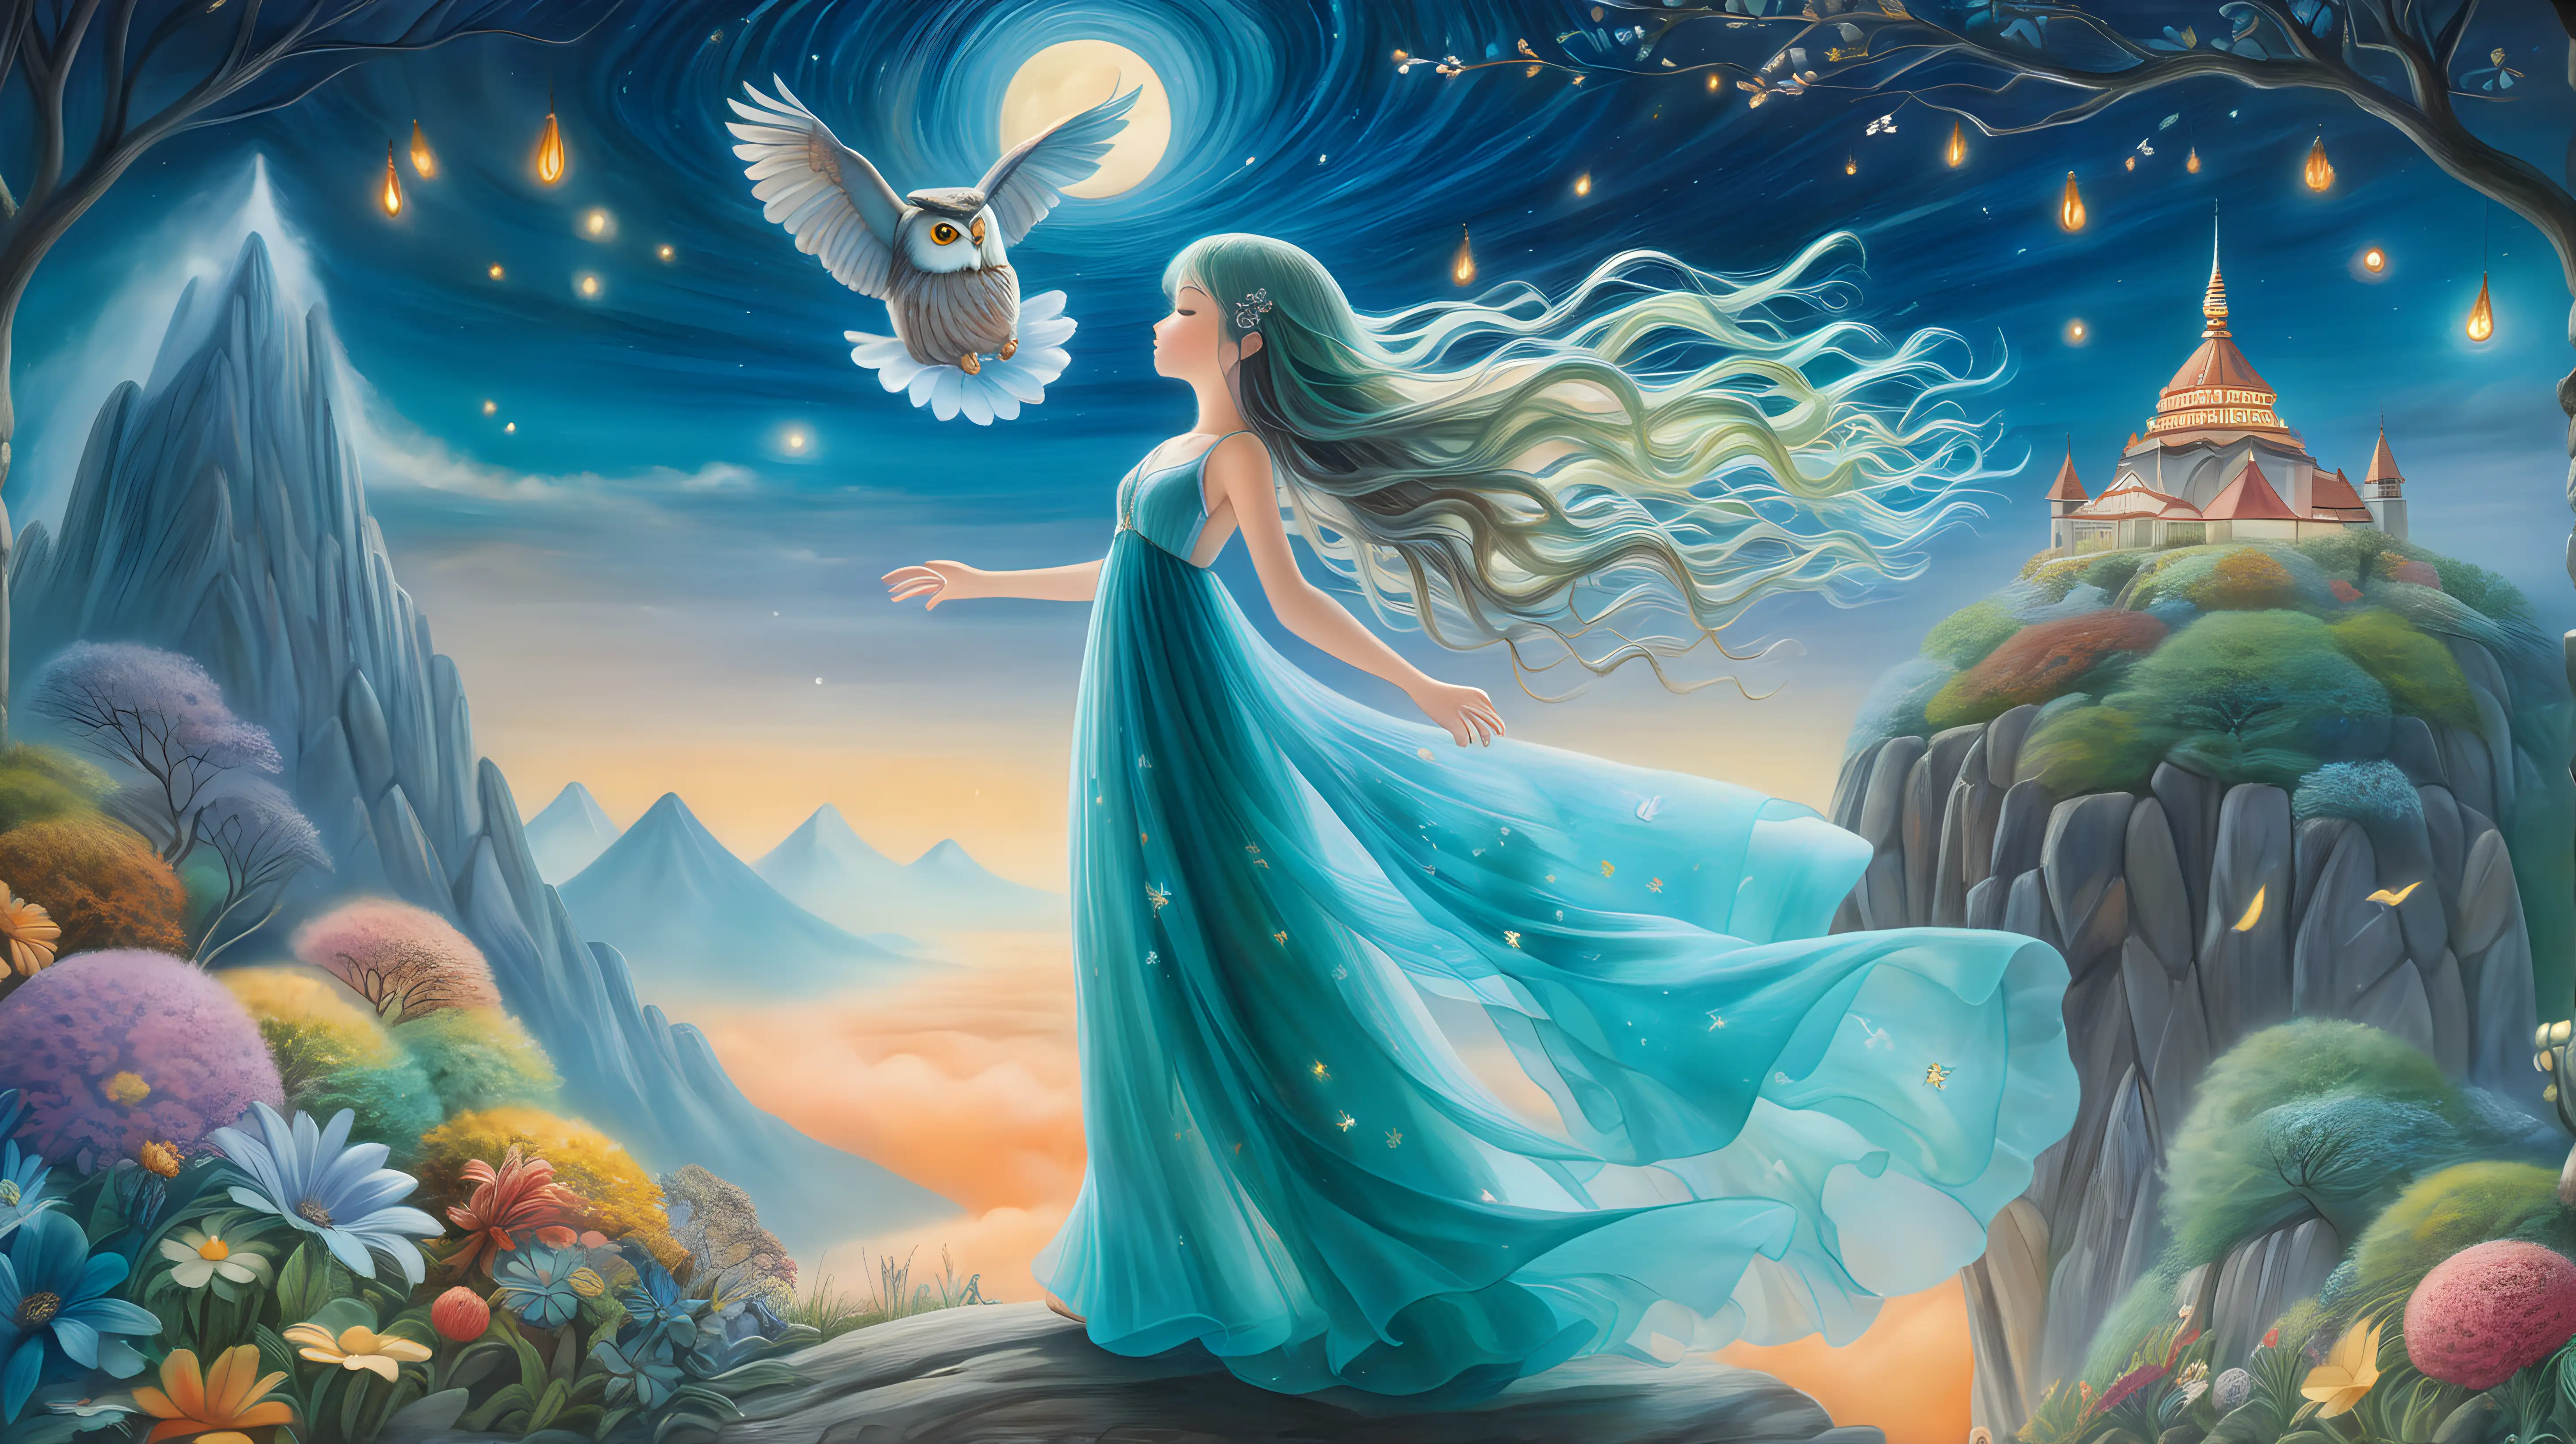 DIORAMA, ghibli inspired painting  of beautiful enchanting slender, long turquoise wavy hair, sheer flowy dress, 18 YEAR OLD girl who shape-shifts into an owl, ethereal owl princess, playing with a big colorful owl in an enchanted forest skyline, flowers, fireflies and moonlight, sea of clouds, mountain, temple, colorful, cliff